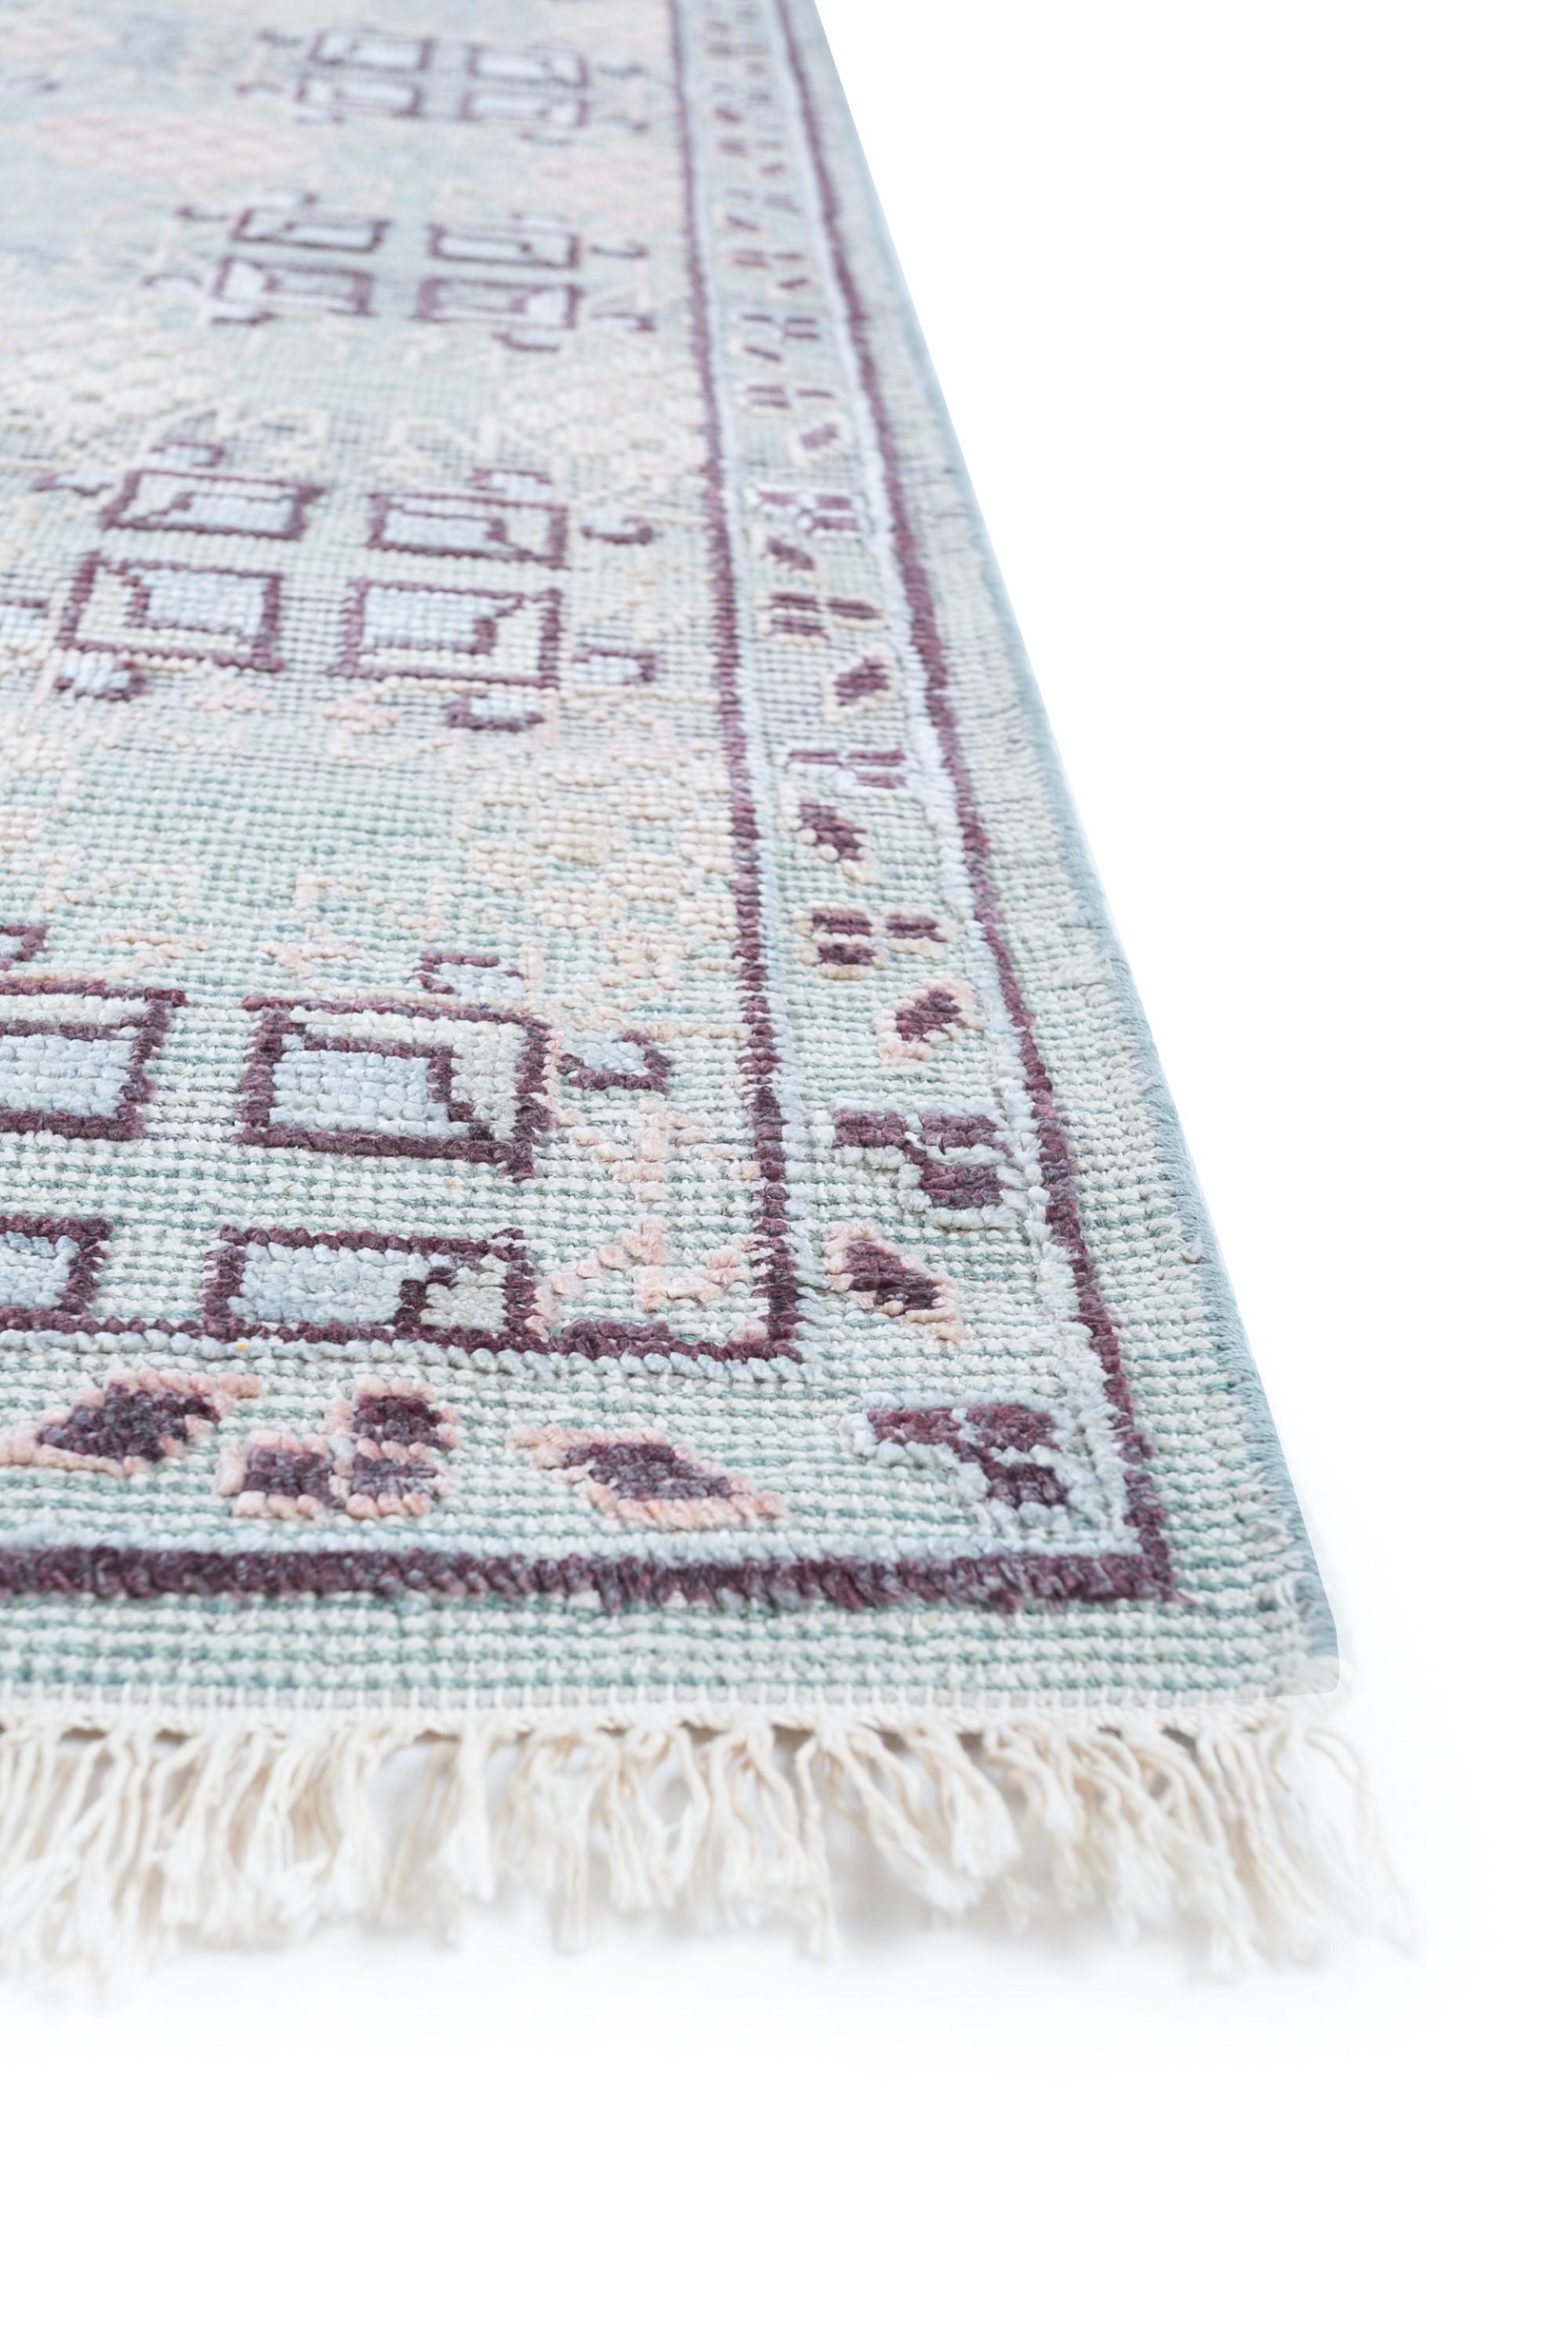 Ever wondered if a rug could transport you to an ethereal realm of aesthetics? Meet this masterpiece, hand-knotted to perfection in rural India. This traditional rug boasts ornate designs and patterns, intricately carved with the utmost precision.